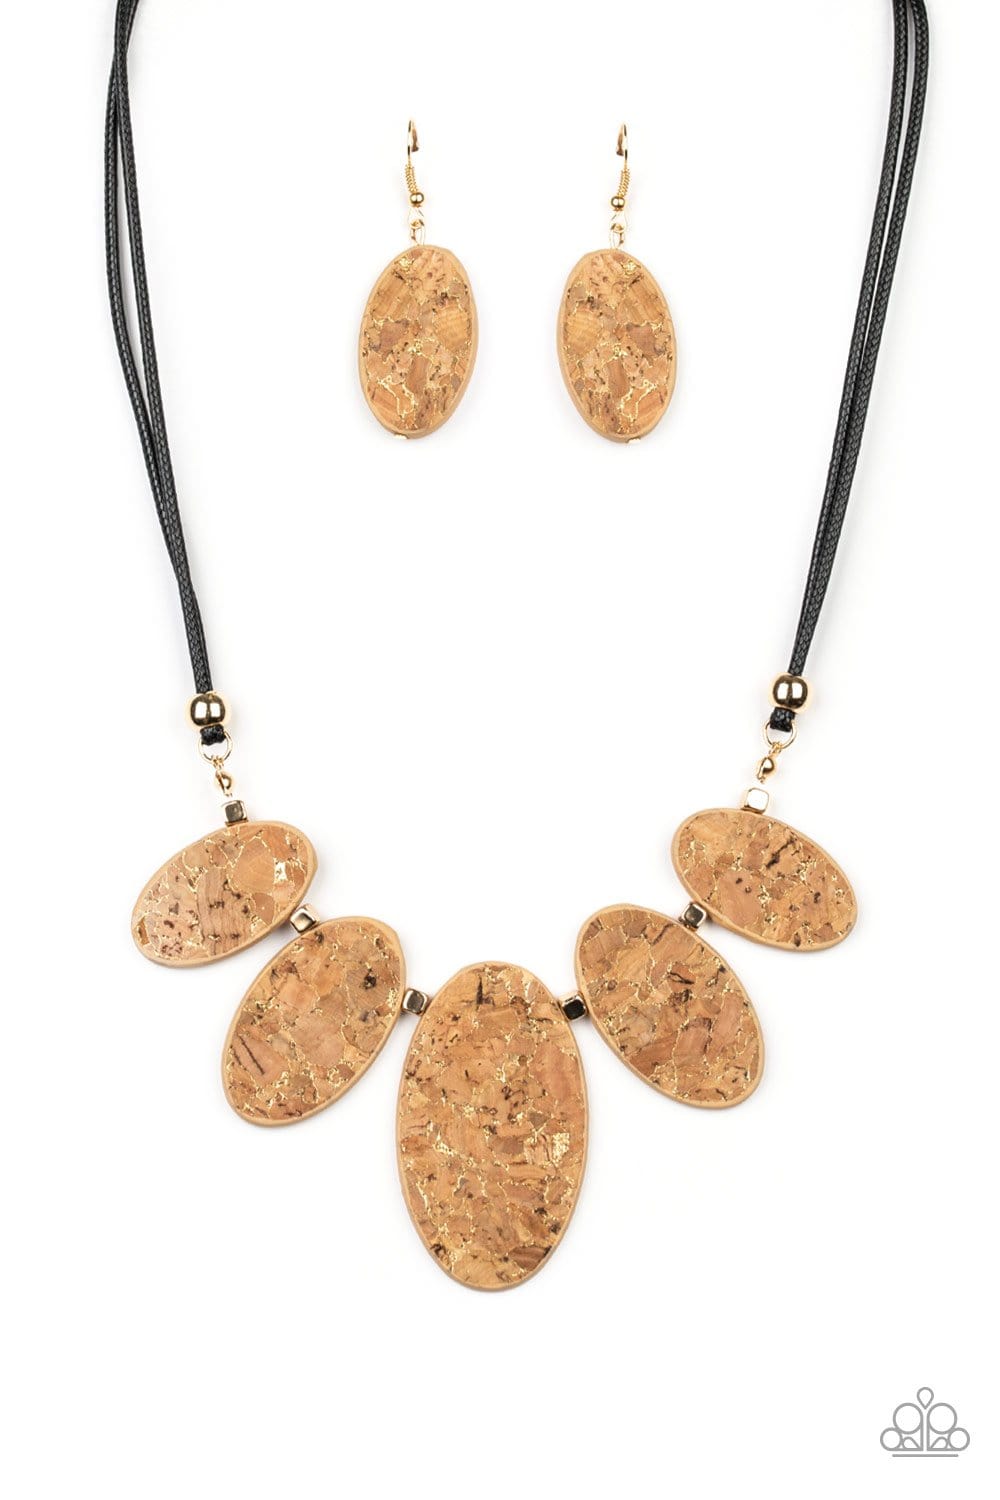 Paparazzi: Natures Finest - Gold Cork-Like Necklace - Jewels N’ Thingz Boutique